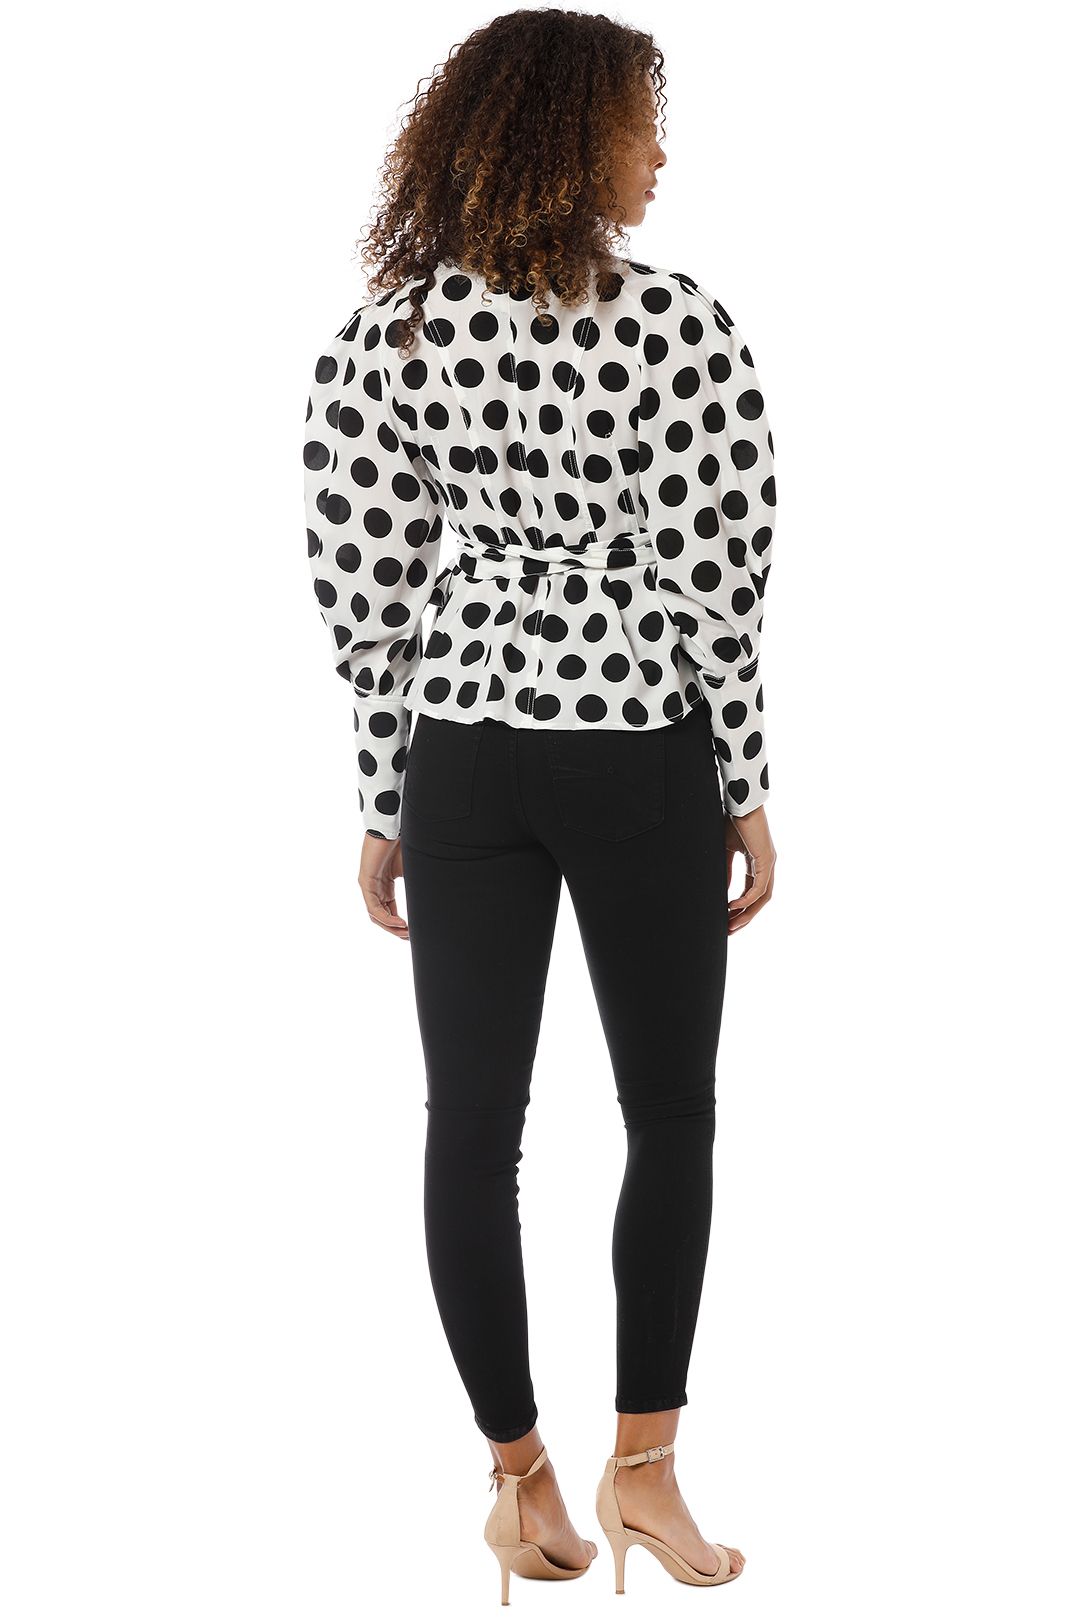 CMEO Collective - Unending LS Top - Black and White - Back